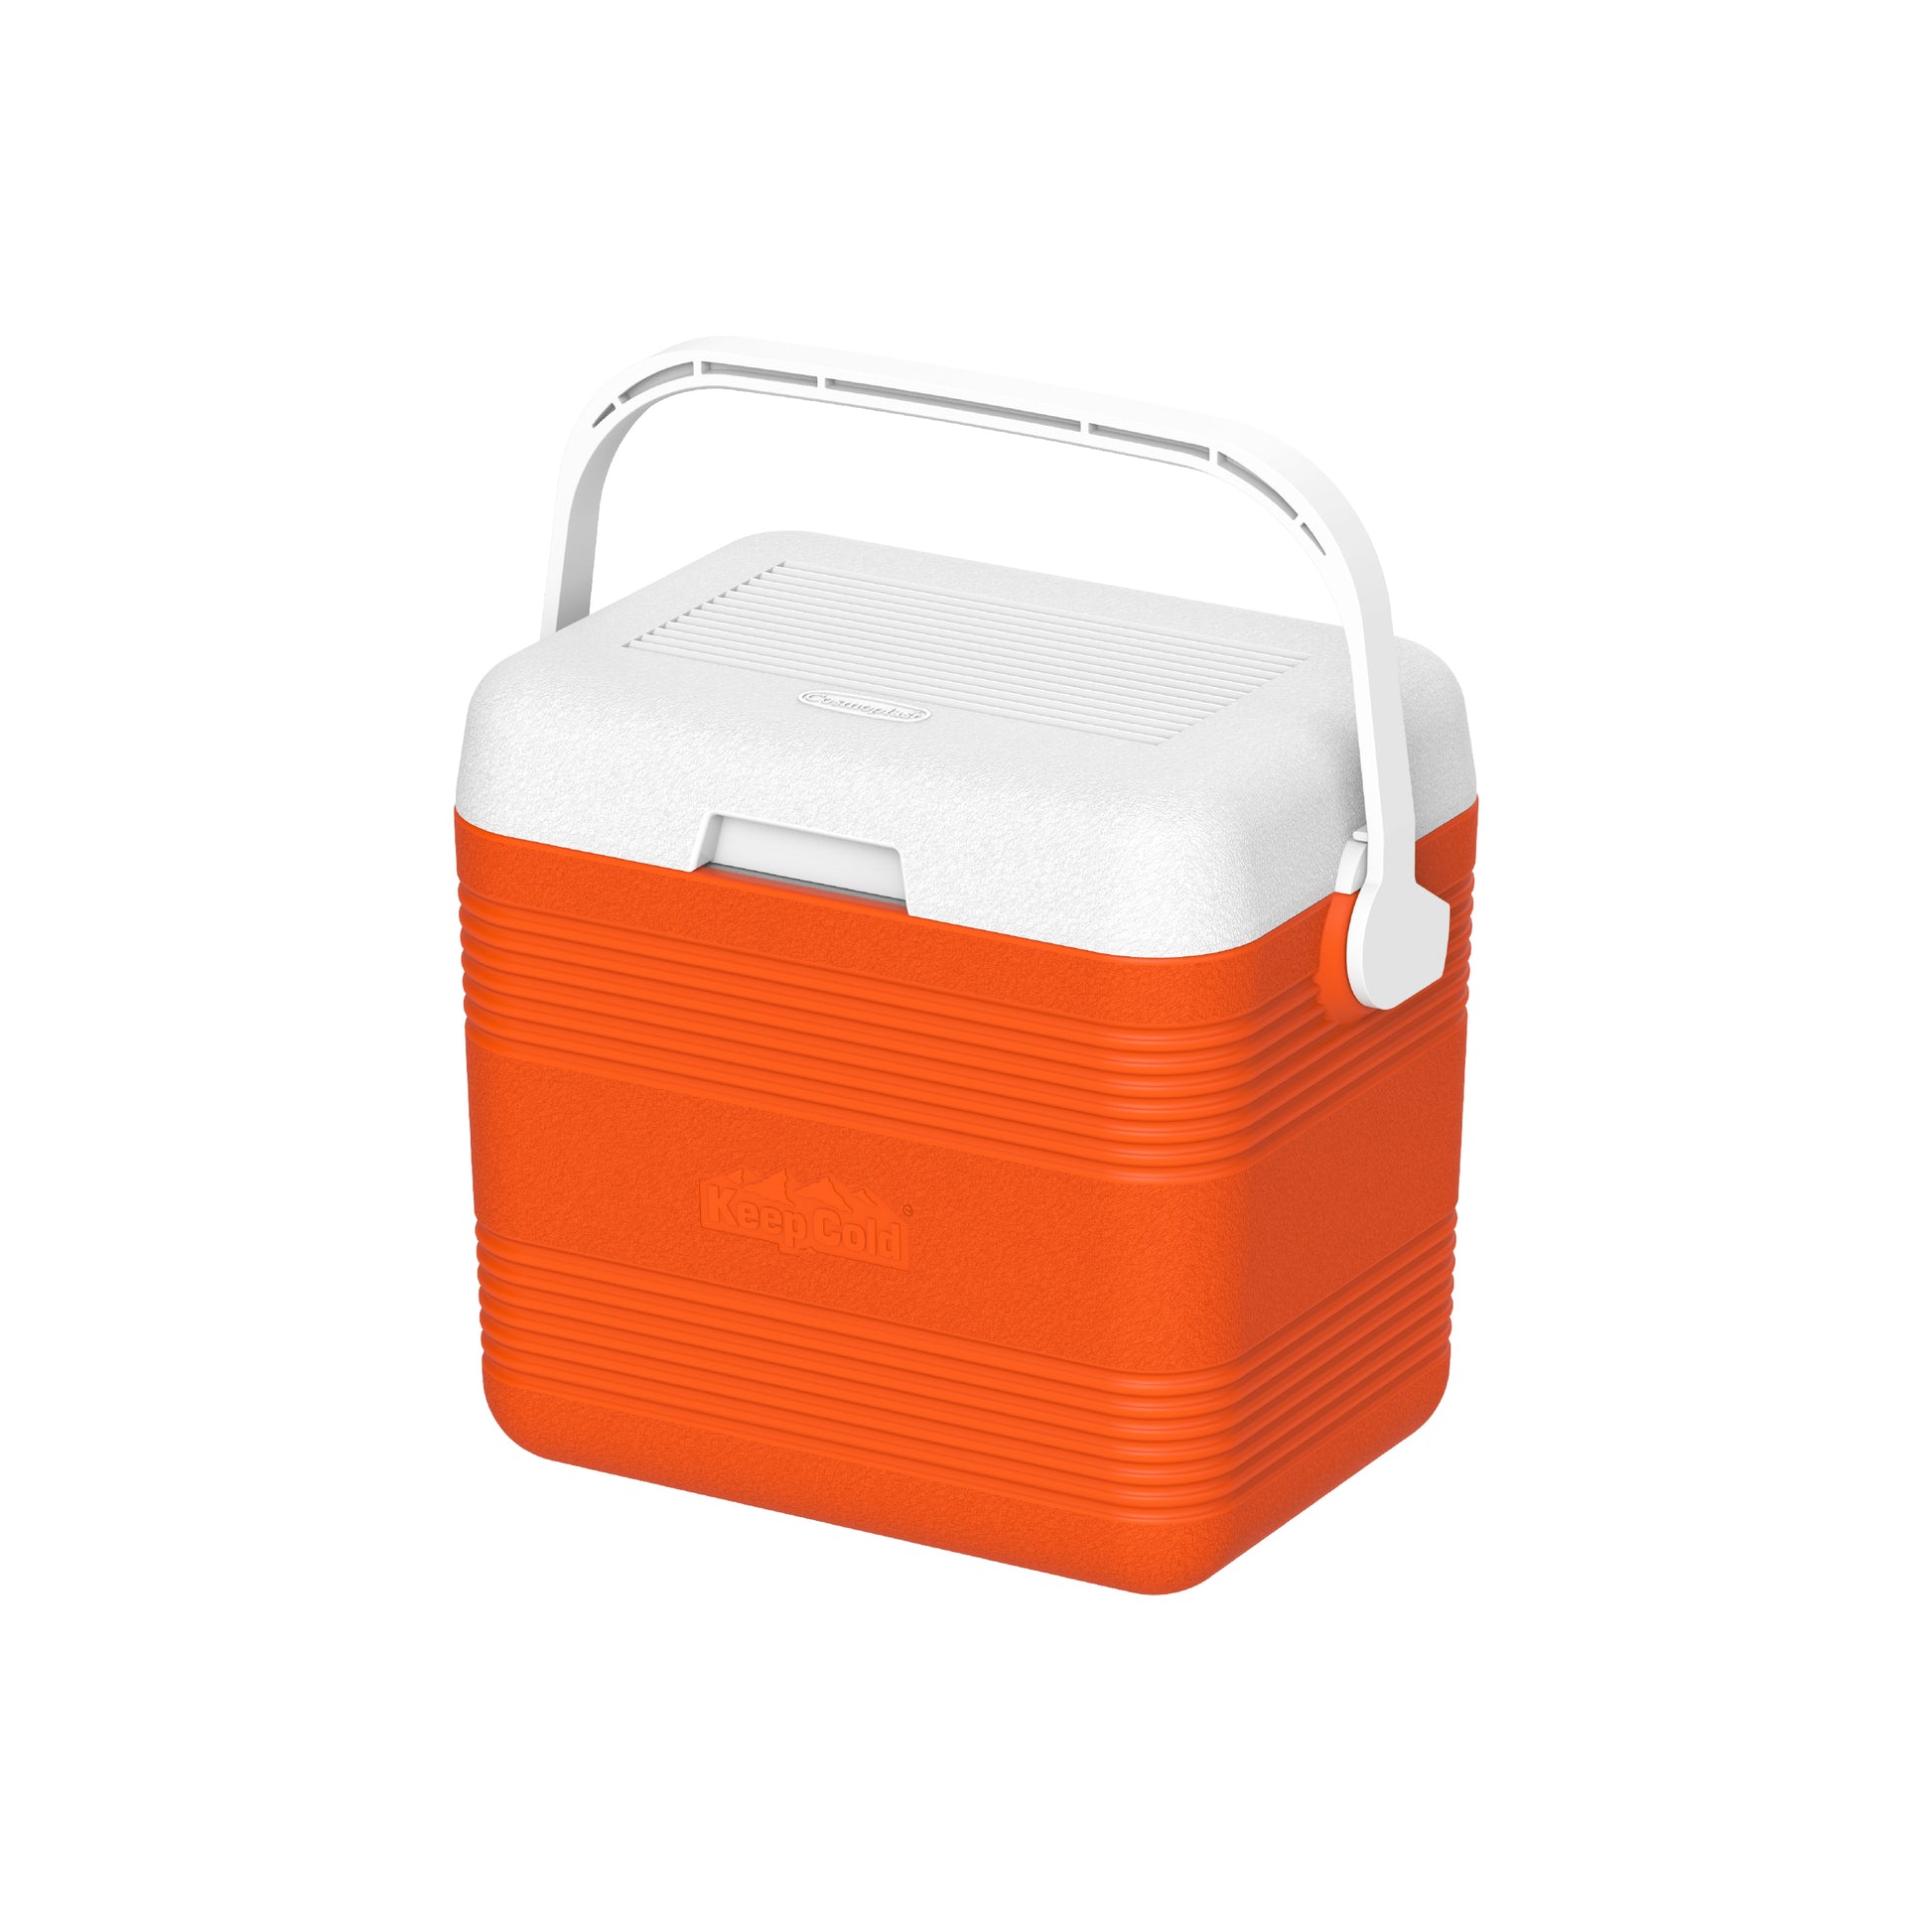 10L KeepCold Deluxe Icebox